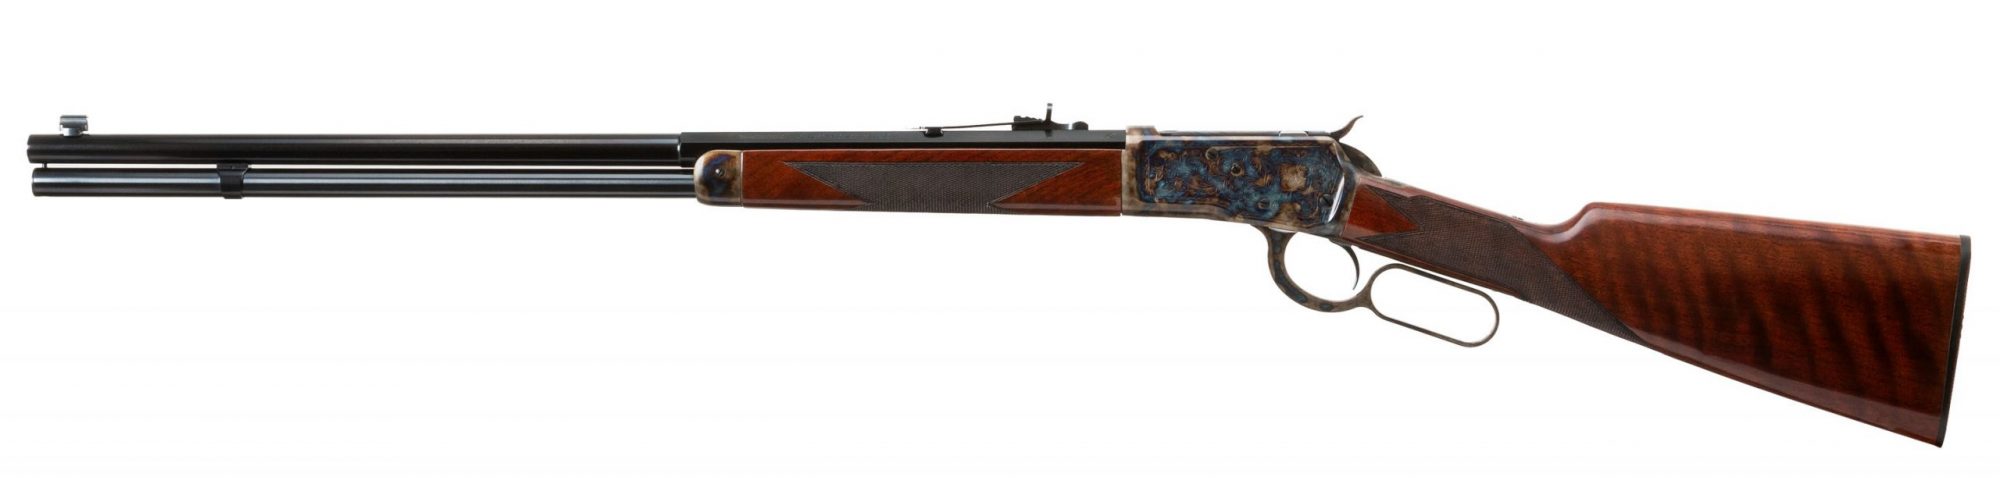 Photo of a new, color case hardened Winchester 1892 125th Anniversary rifle, featuring bone charcoal color case hardening by Turnbull Restoration of Bloomfield, NY